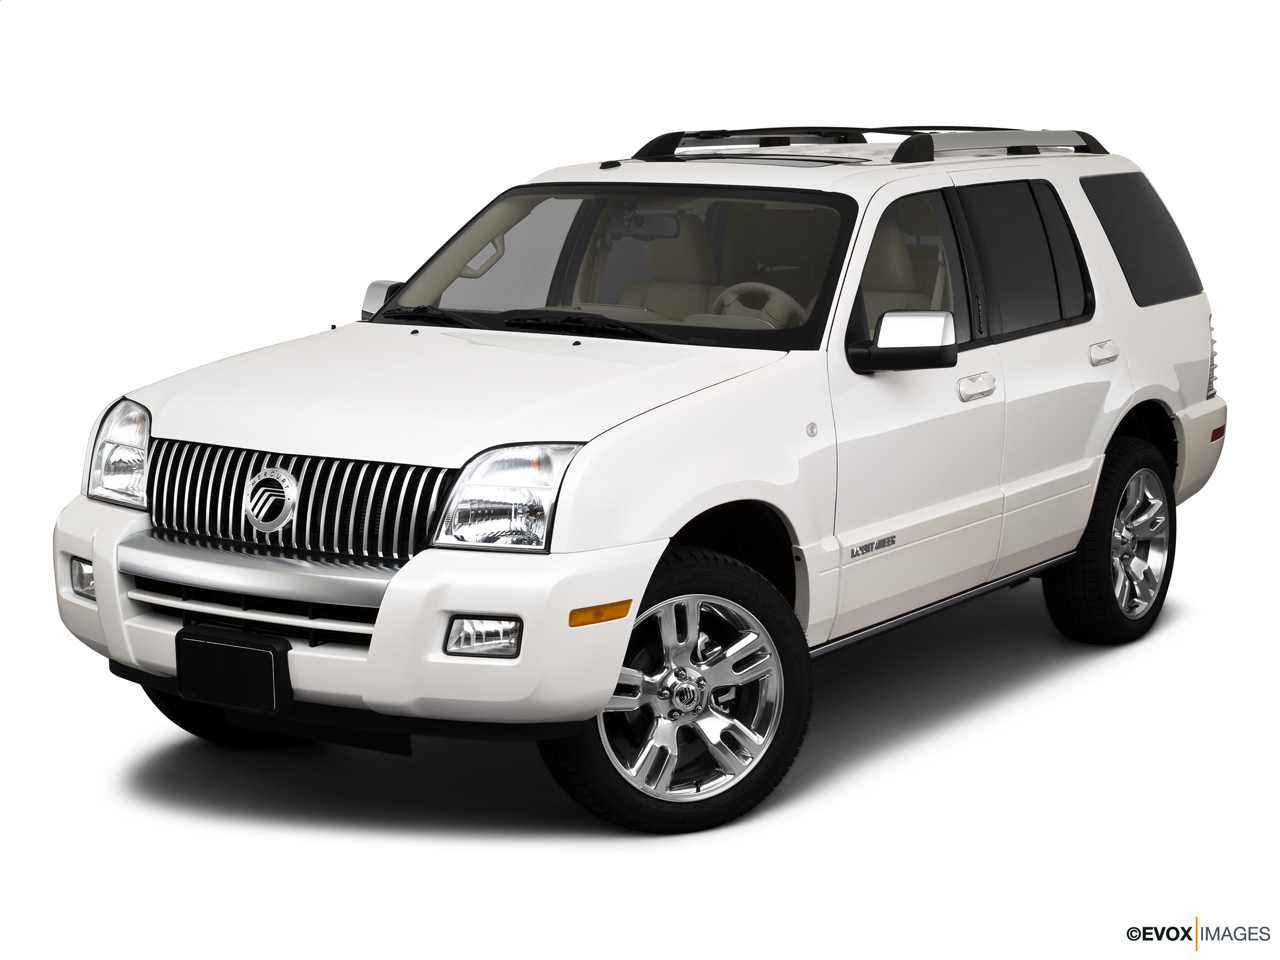 2010 Mercury Mountaineer Premier Front angle view. 